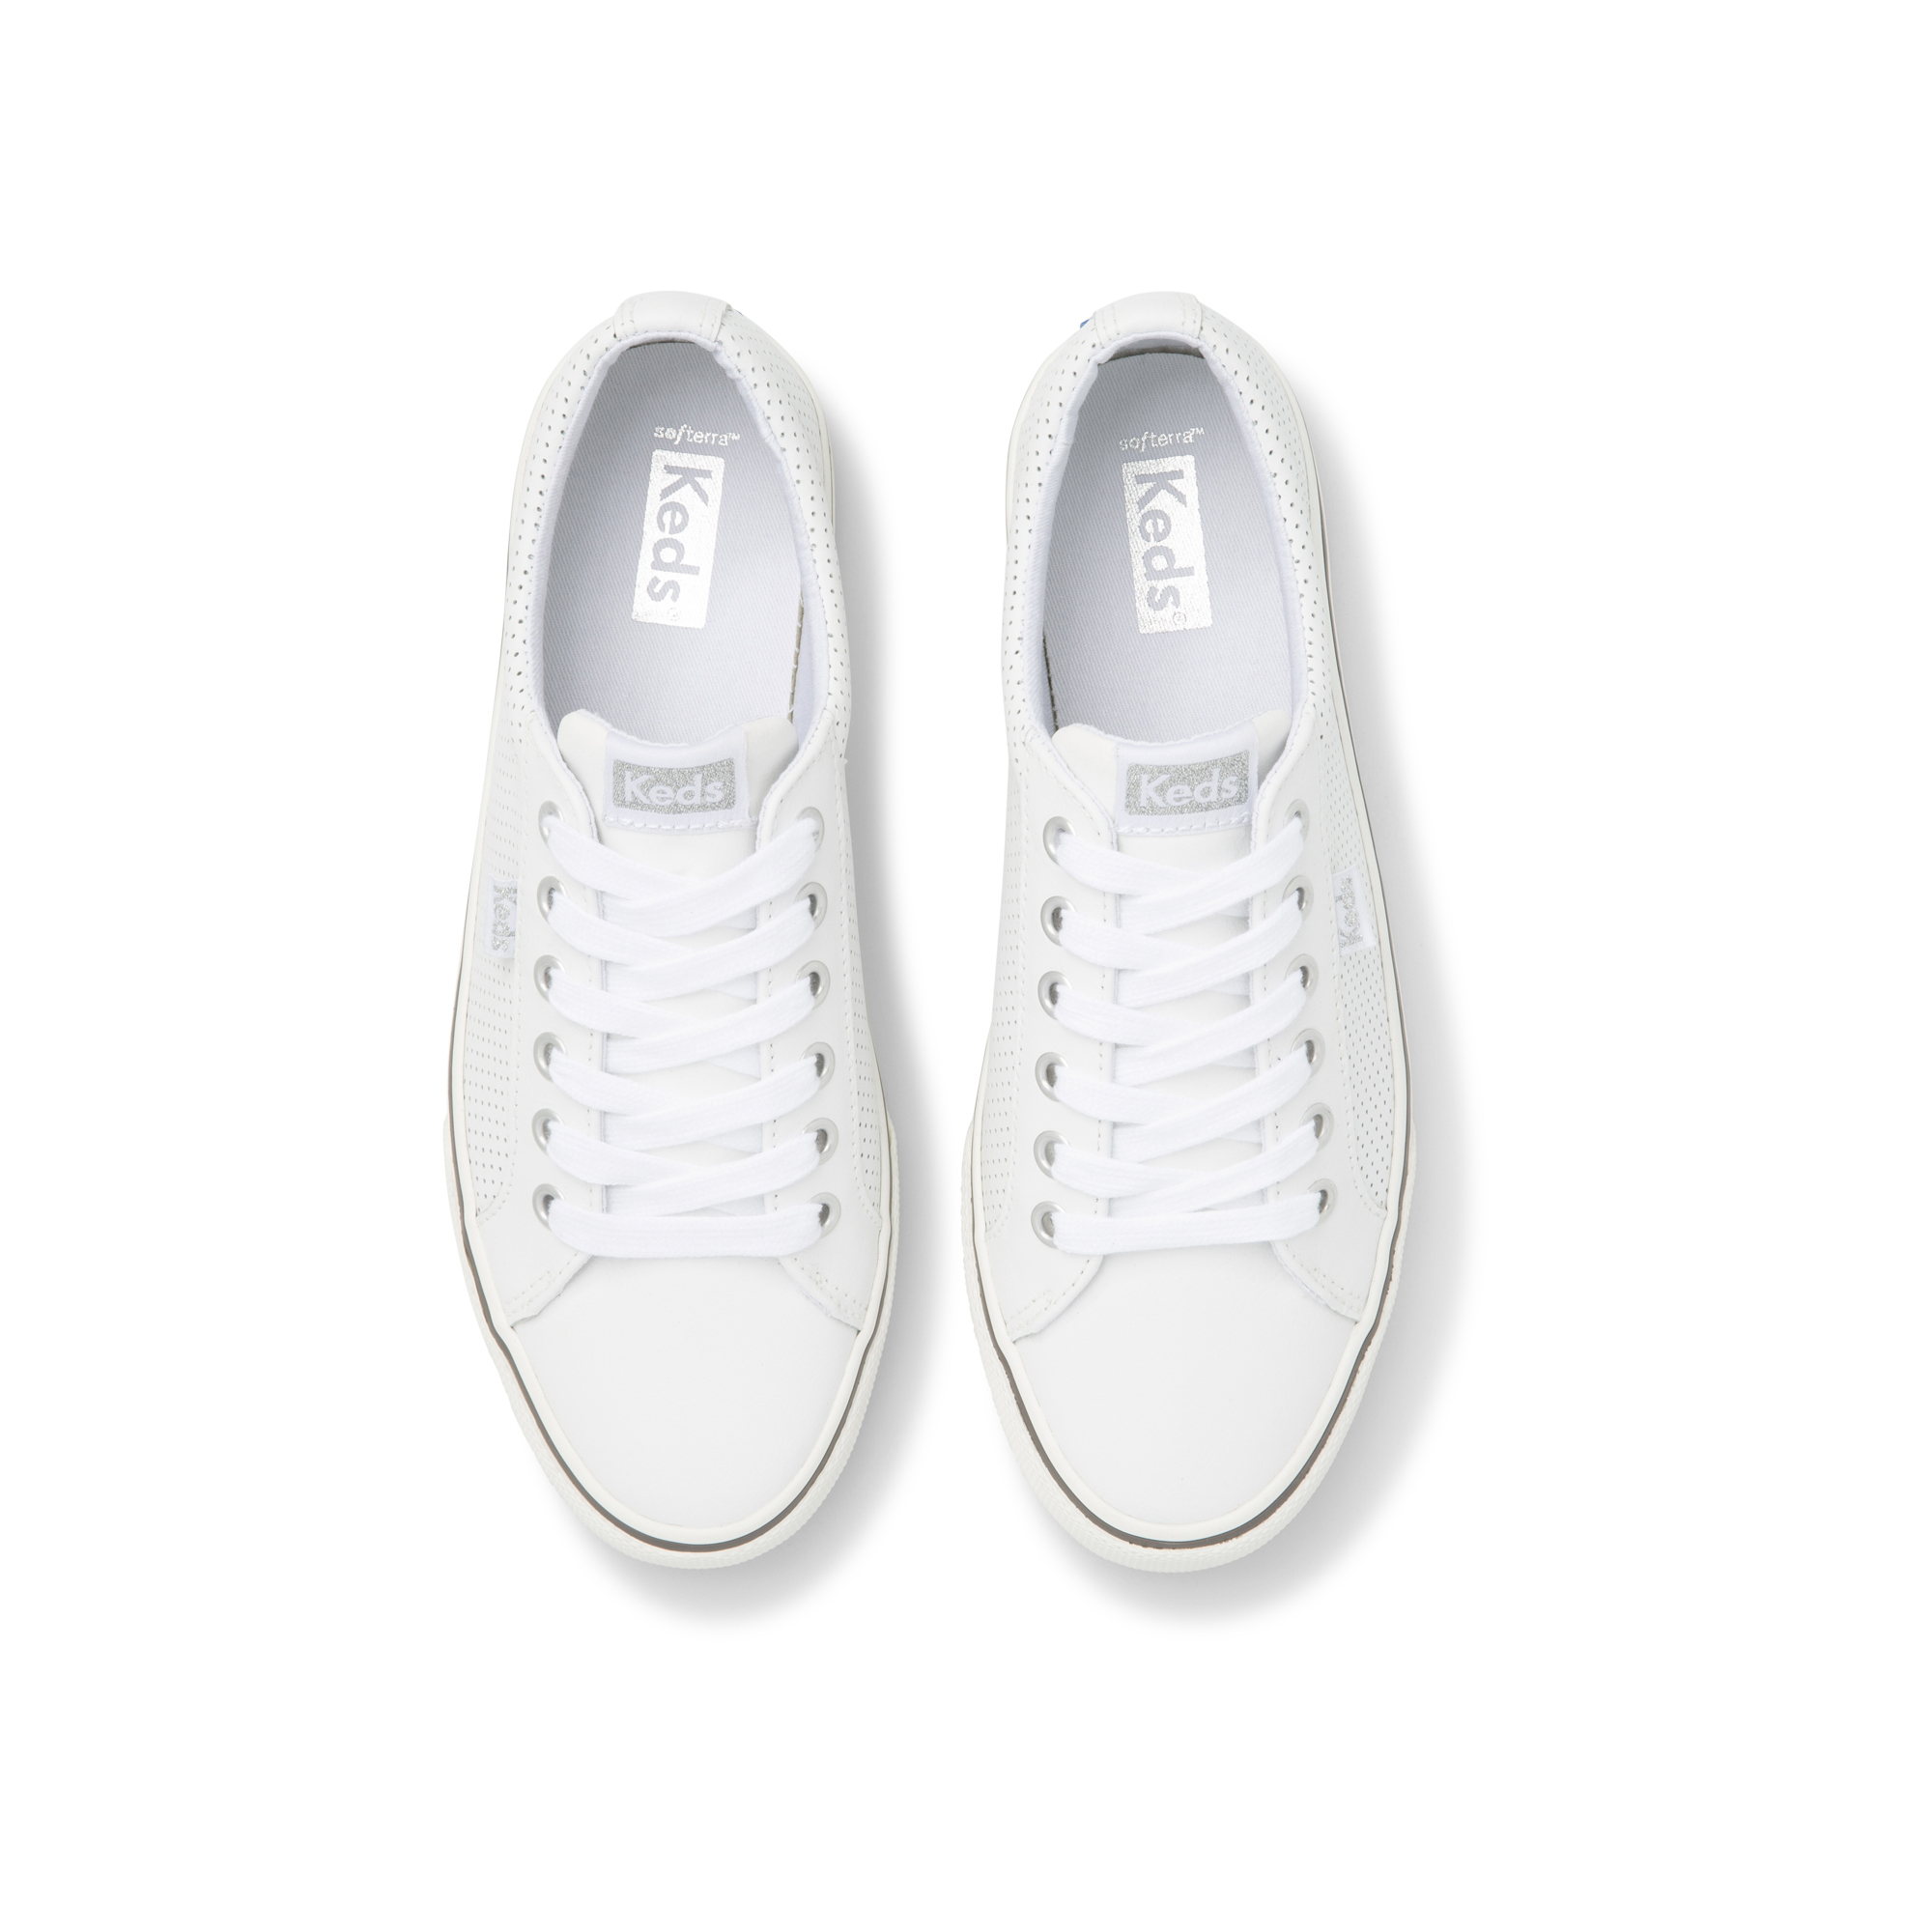 Giày Thể Thao Keds Nữ- Jump Kick Perf Leather White- KD065971